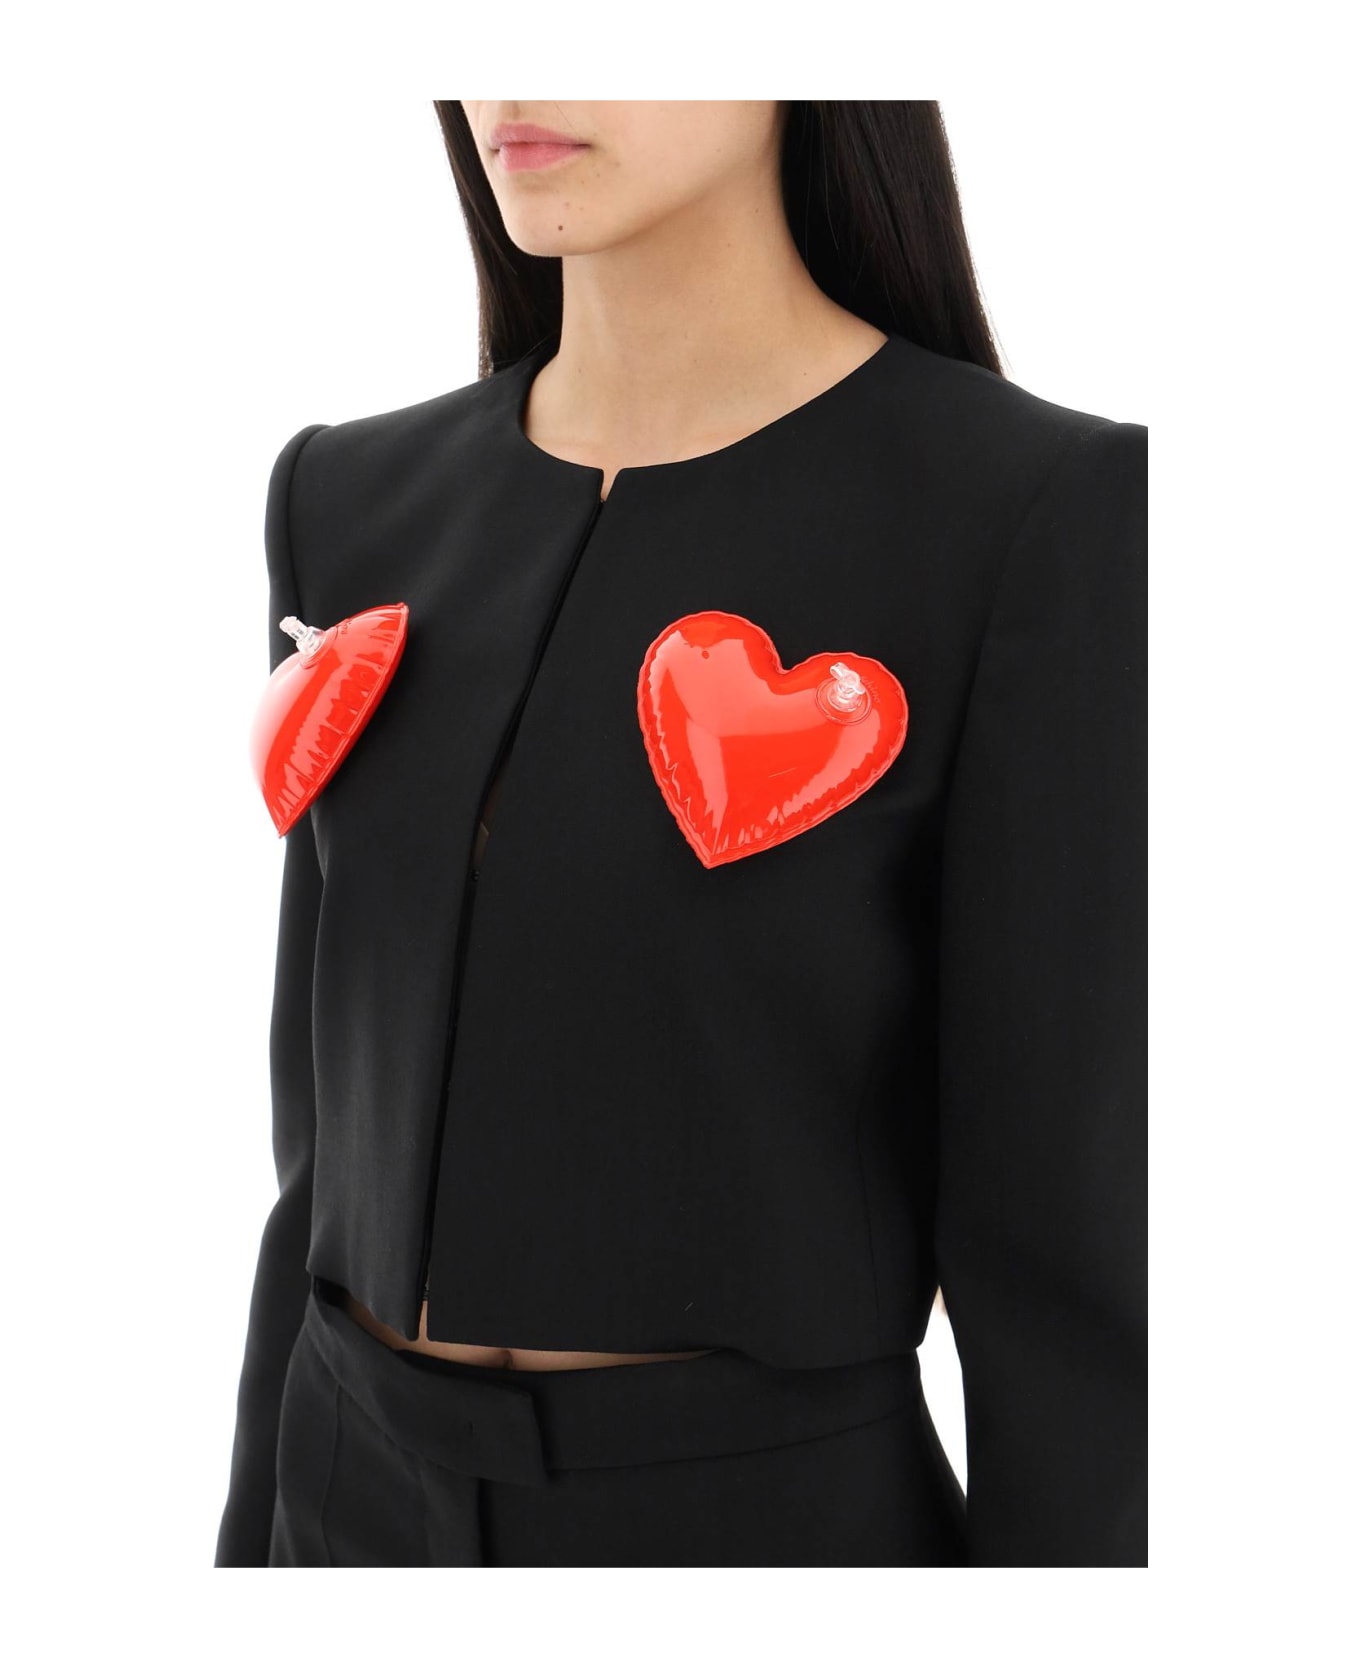 Moschino Inflatable Heart Applique Cropped Jacket - NERO (Black)